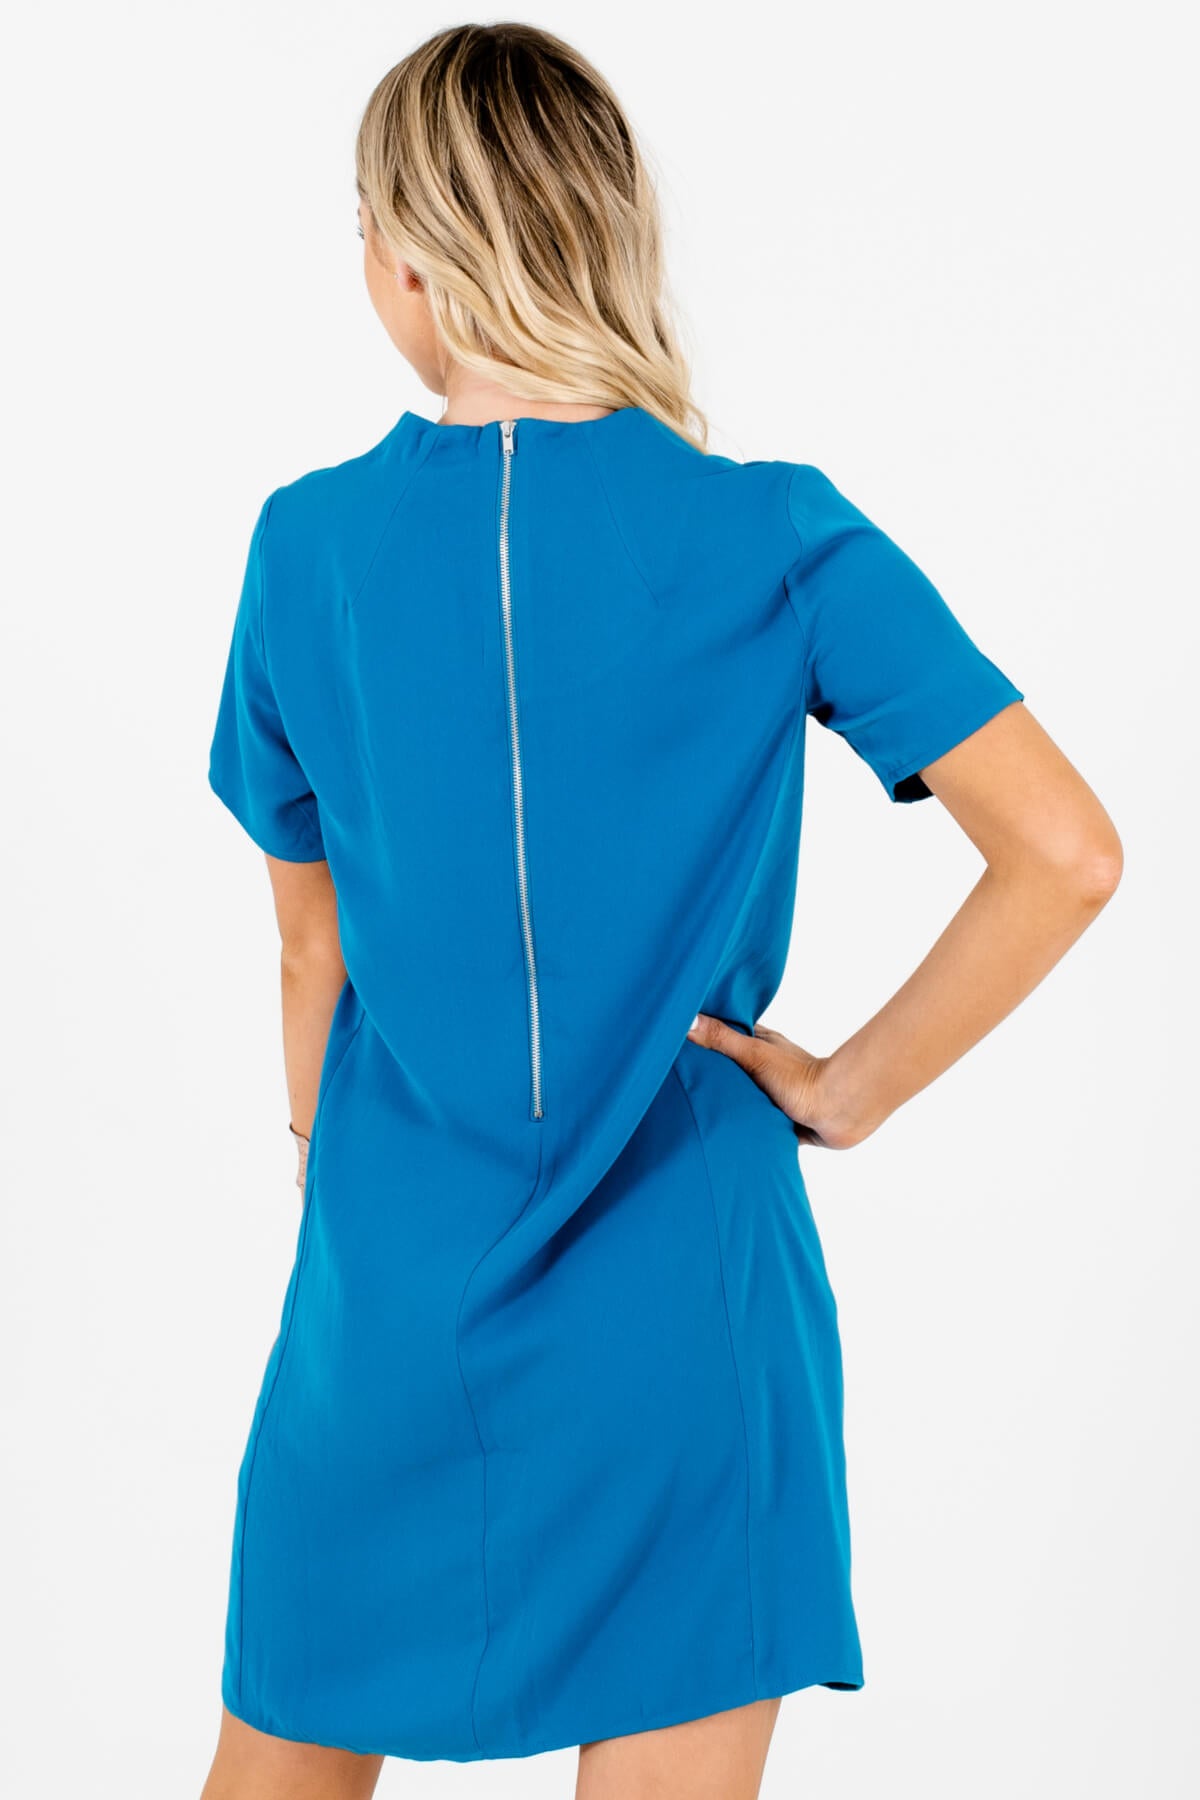 Solid Blue Mini Dresses Affordable Business Casual Boutique